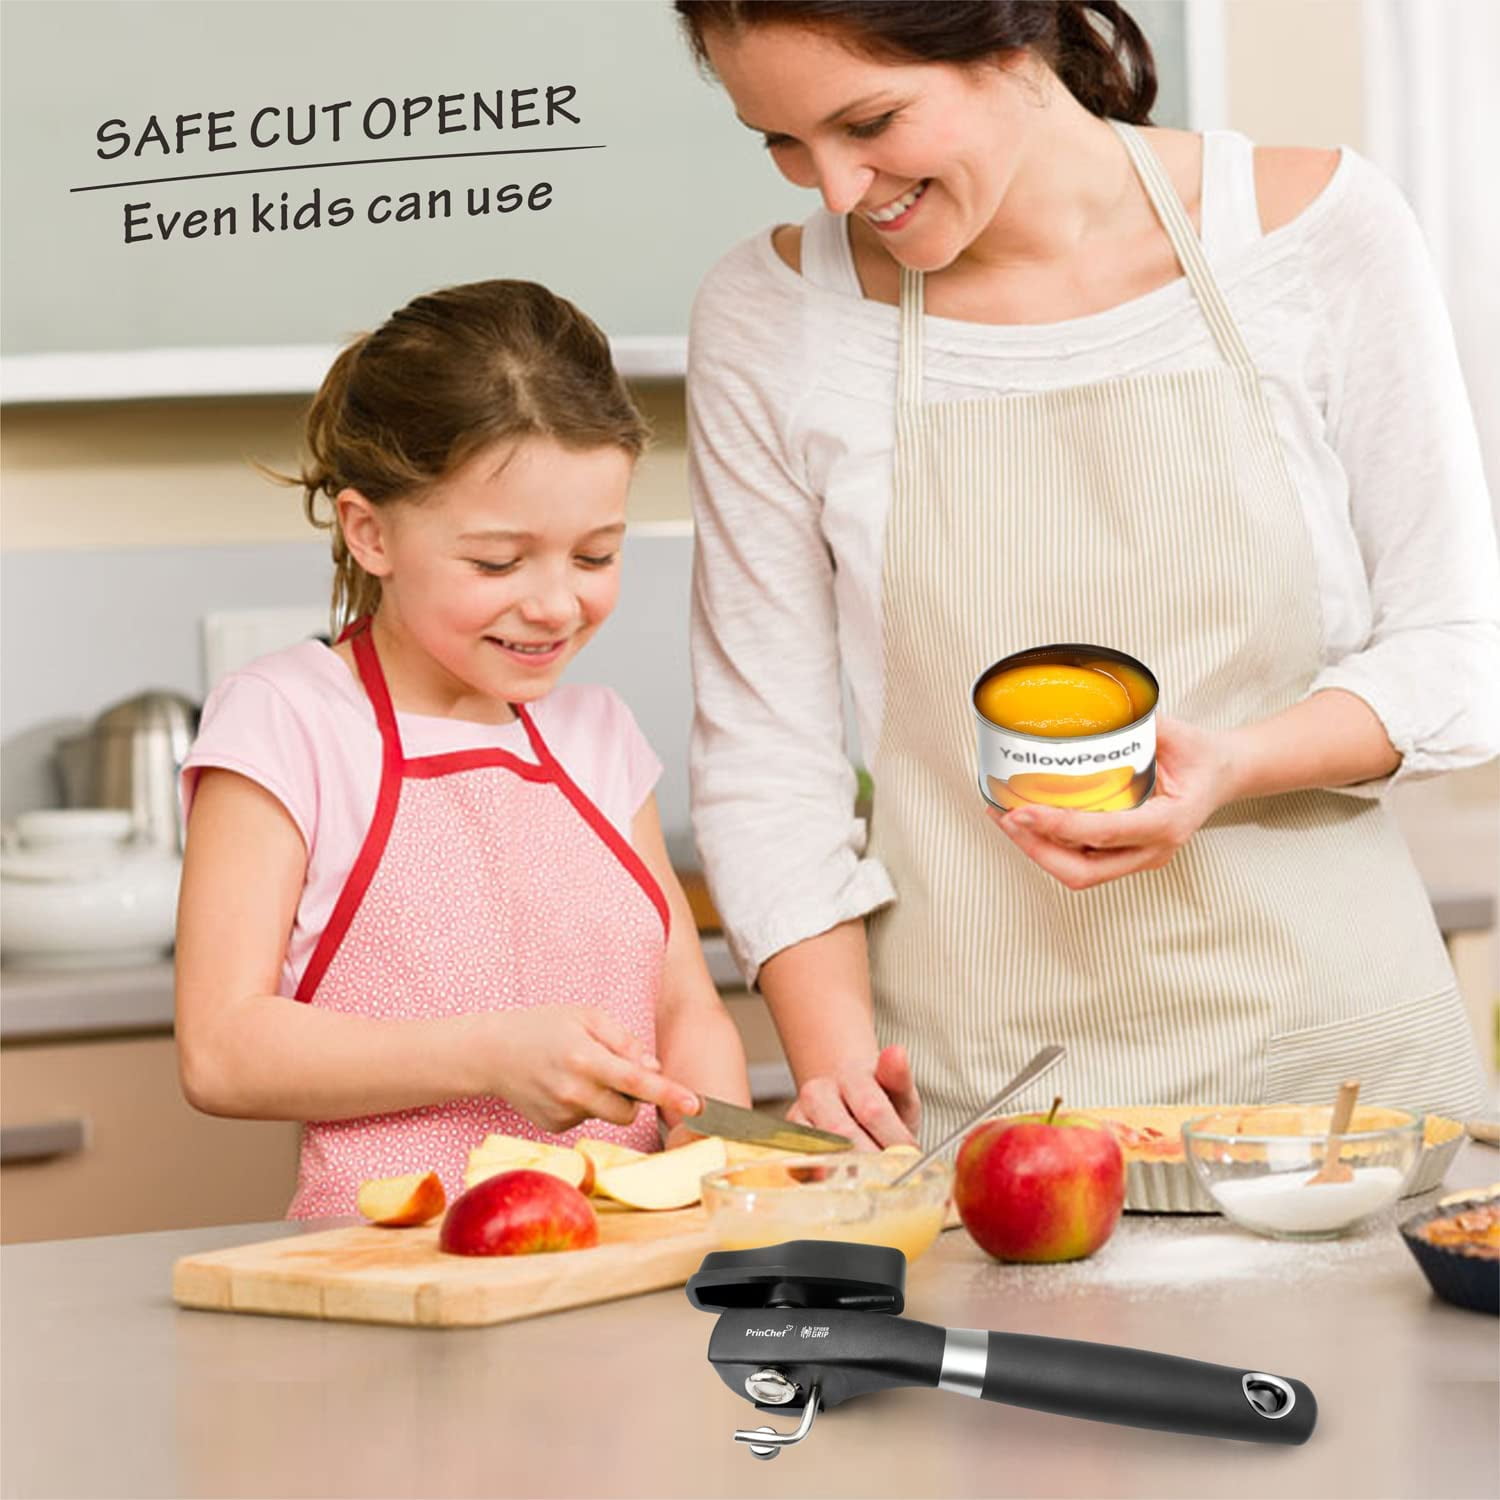 PrinChef Can Opener with Magnet, No Trouble Lid Lift Manual Can Opener –  DealJock